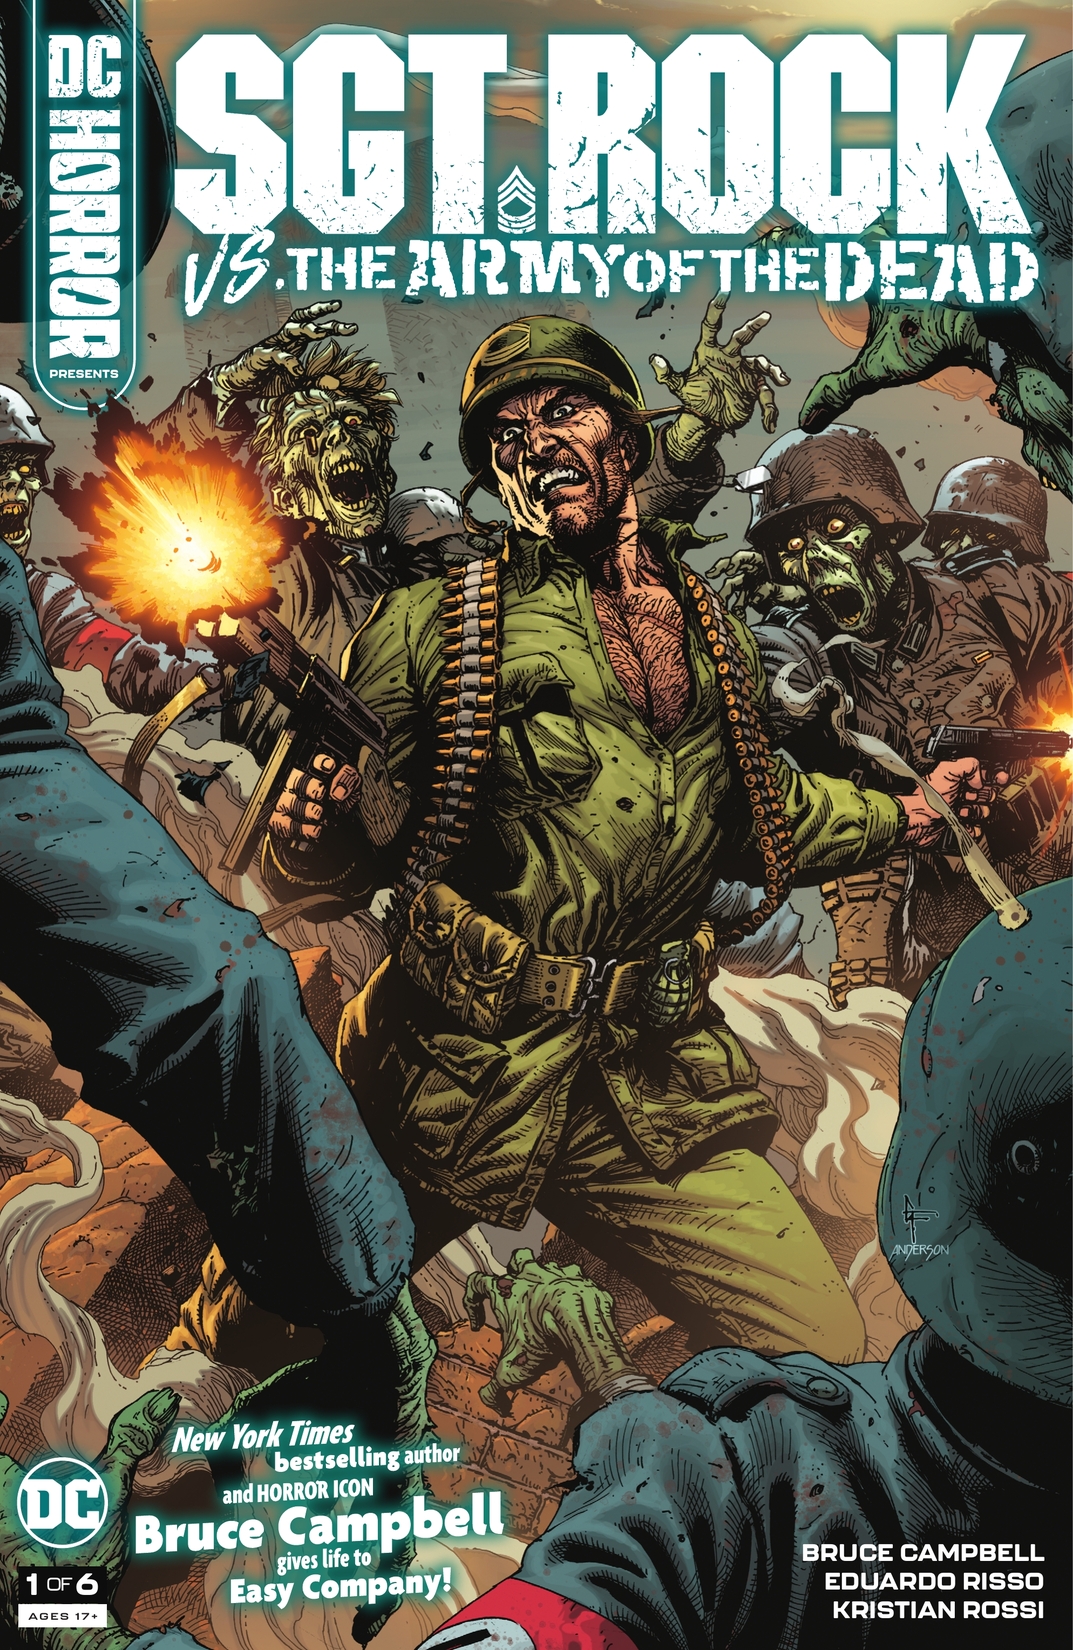 DC Horror Presents: Sgt. Rock vs. The Army of the Dead #1 preview images